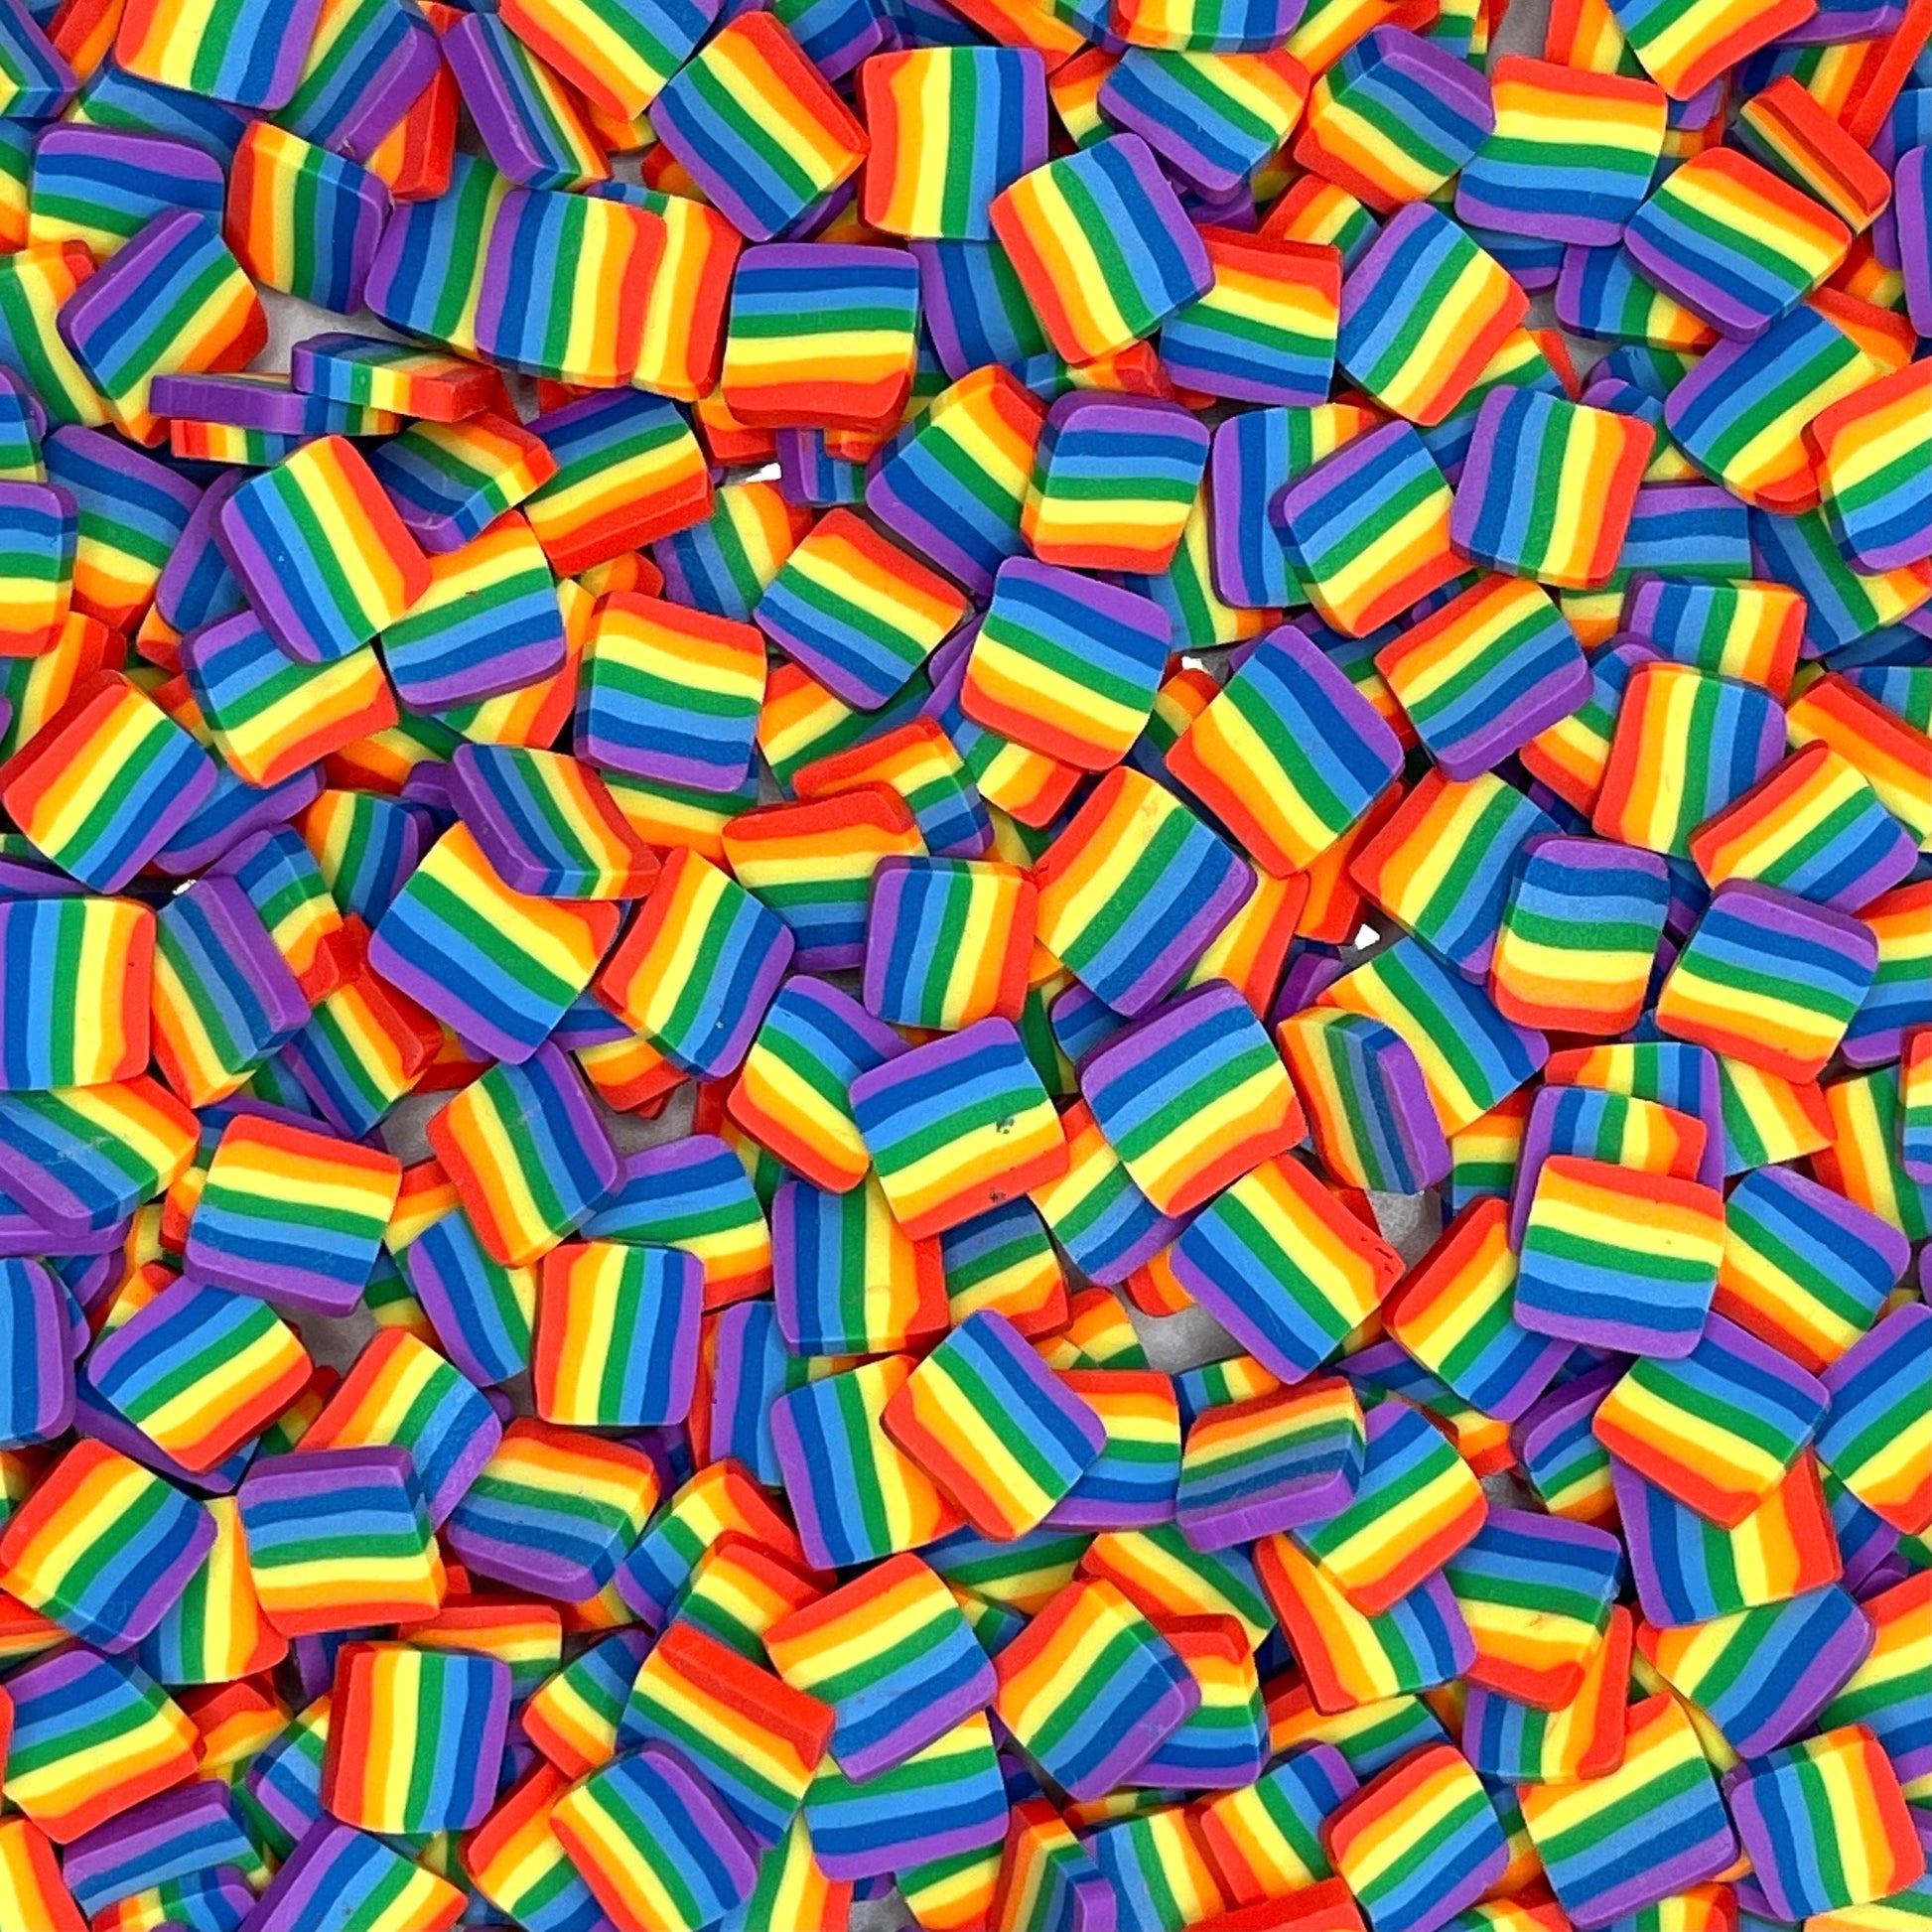 FAKE 5MM/10MM Rainbow Flag Polymer Clay Sprinkle (NOT EDIBLE) D19-04 (5MM) | D19-05 (10MM)